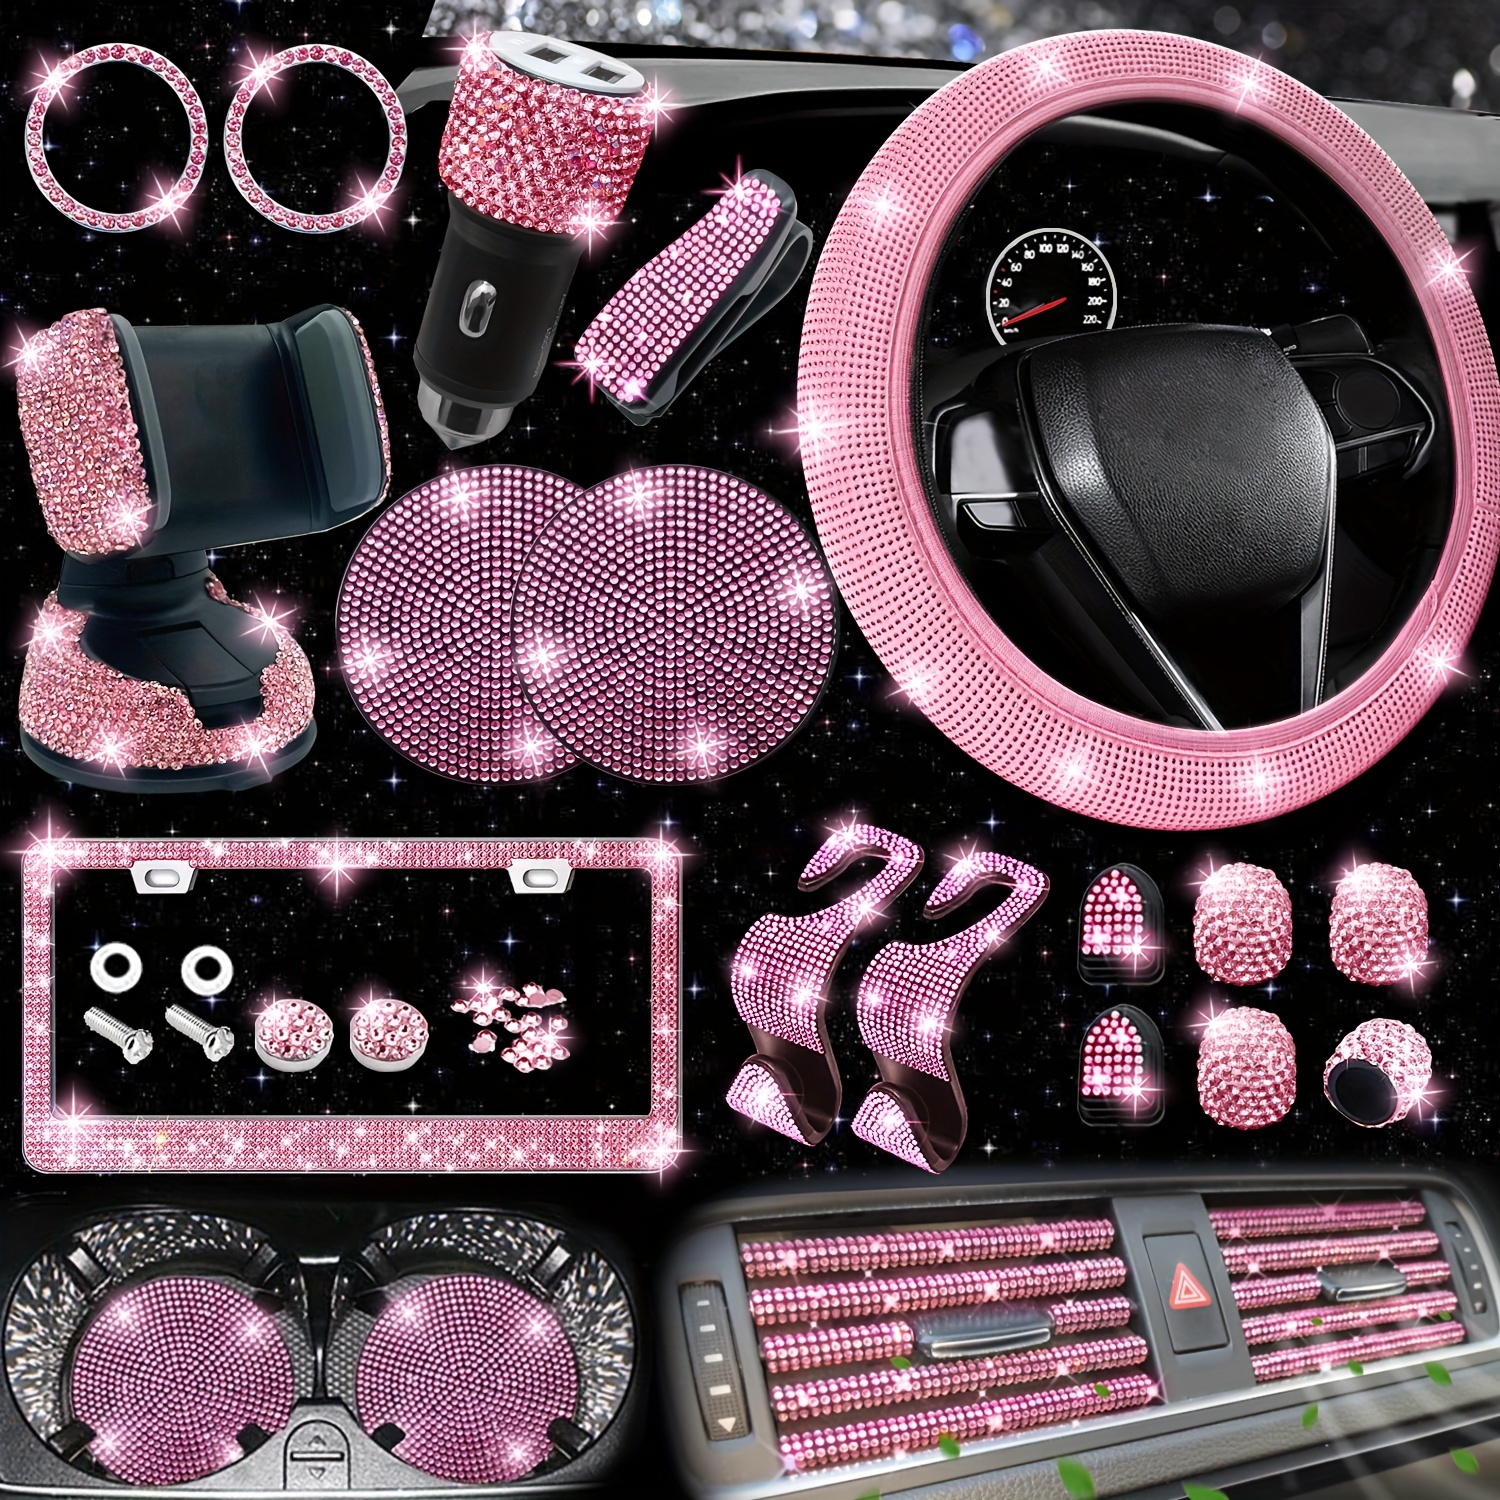 New Bling Car Accessories Set For Women Steering Wheel Cover License Plate  Frame Car Vent Decor Phone Holder Hook USB Charger From 17,44 €